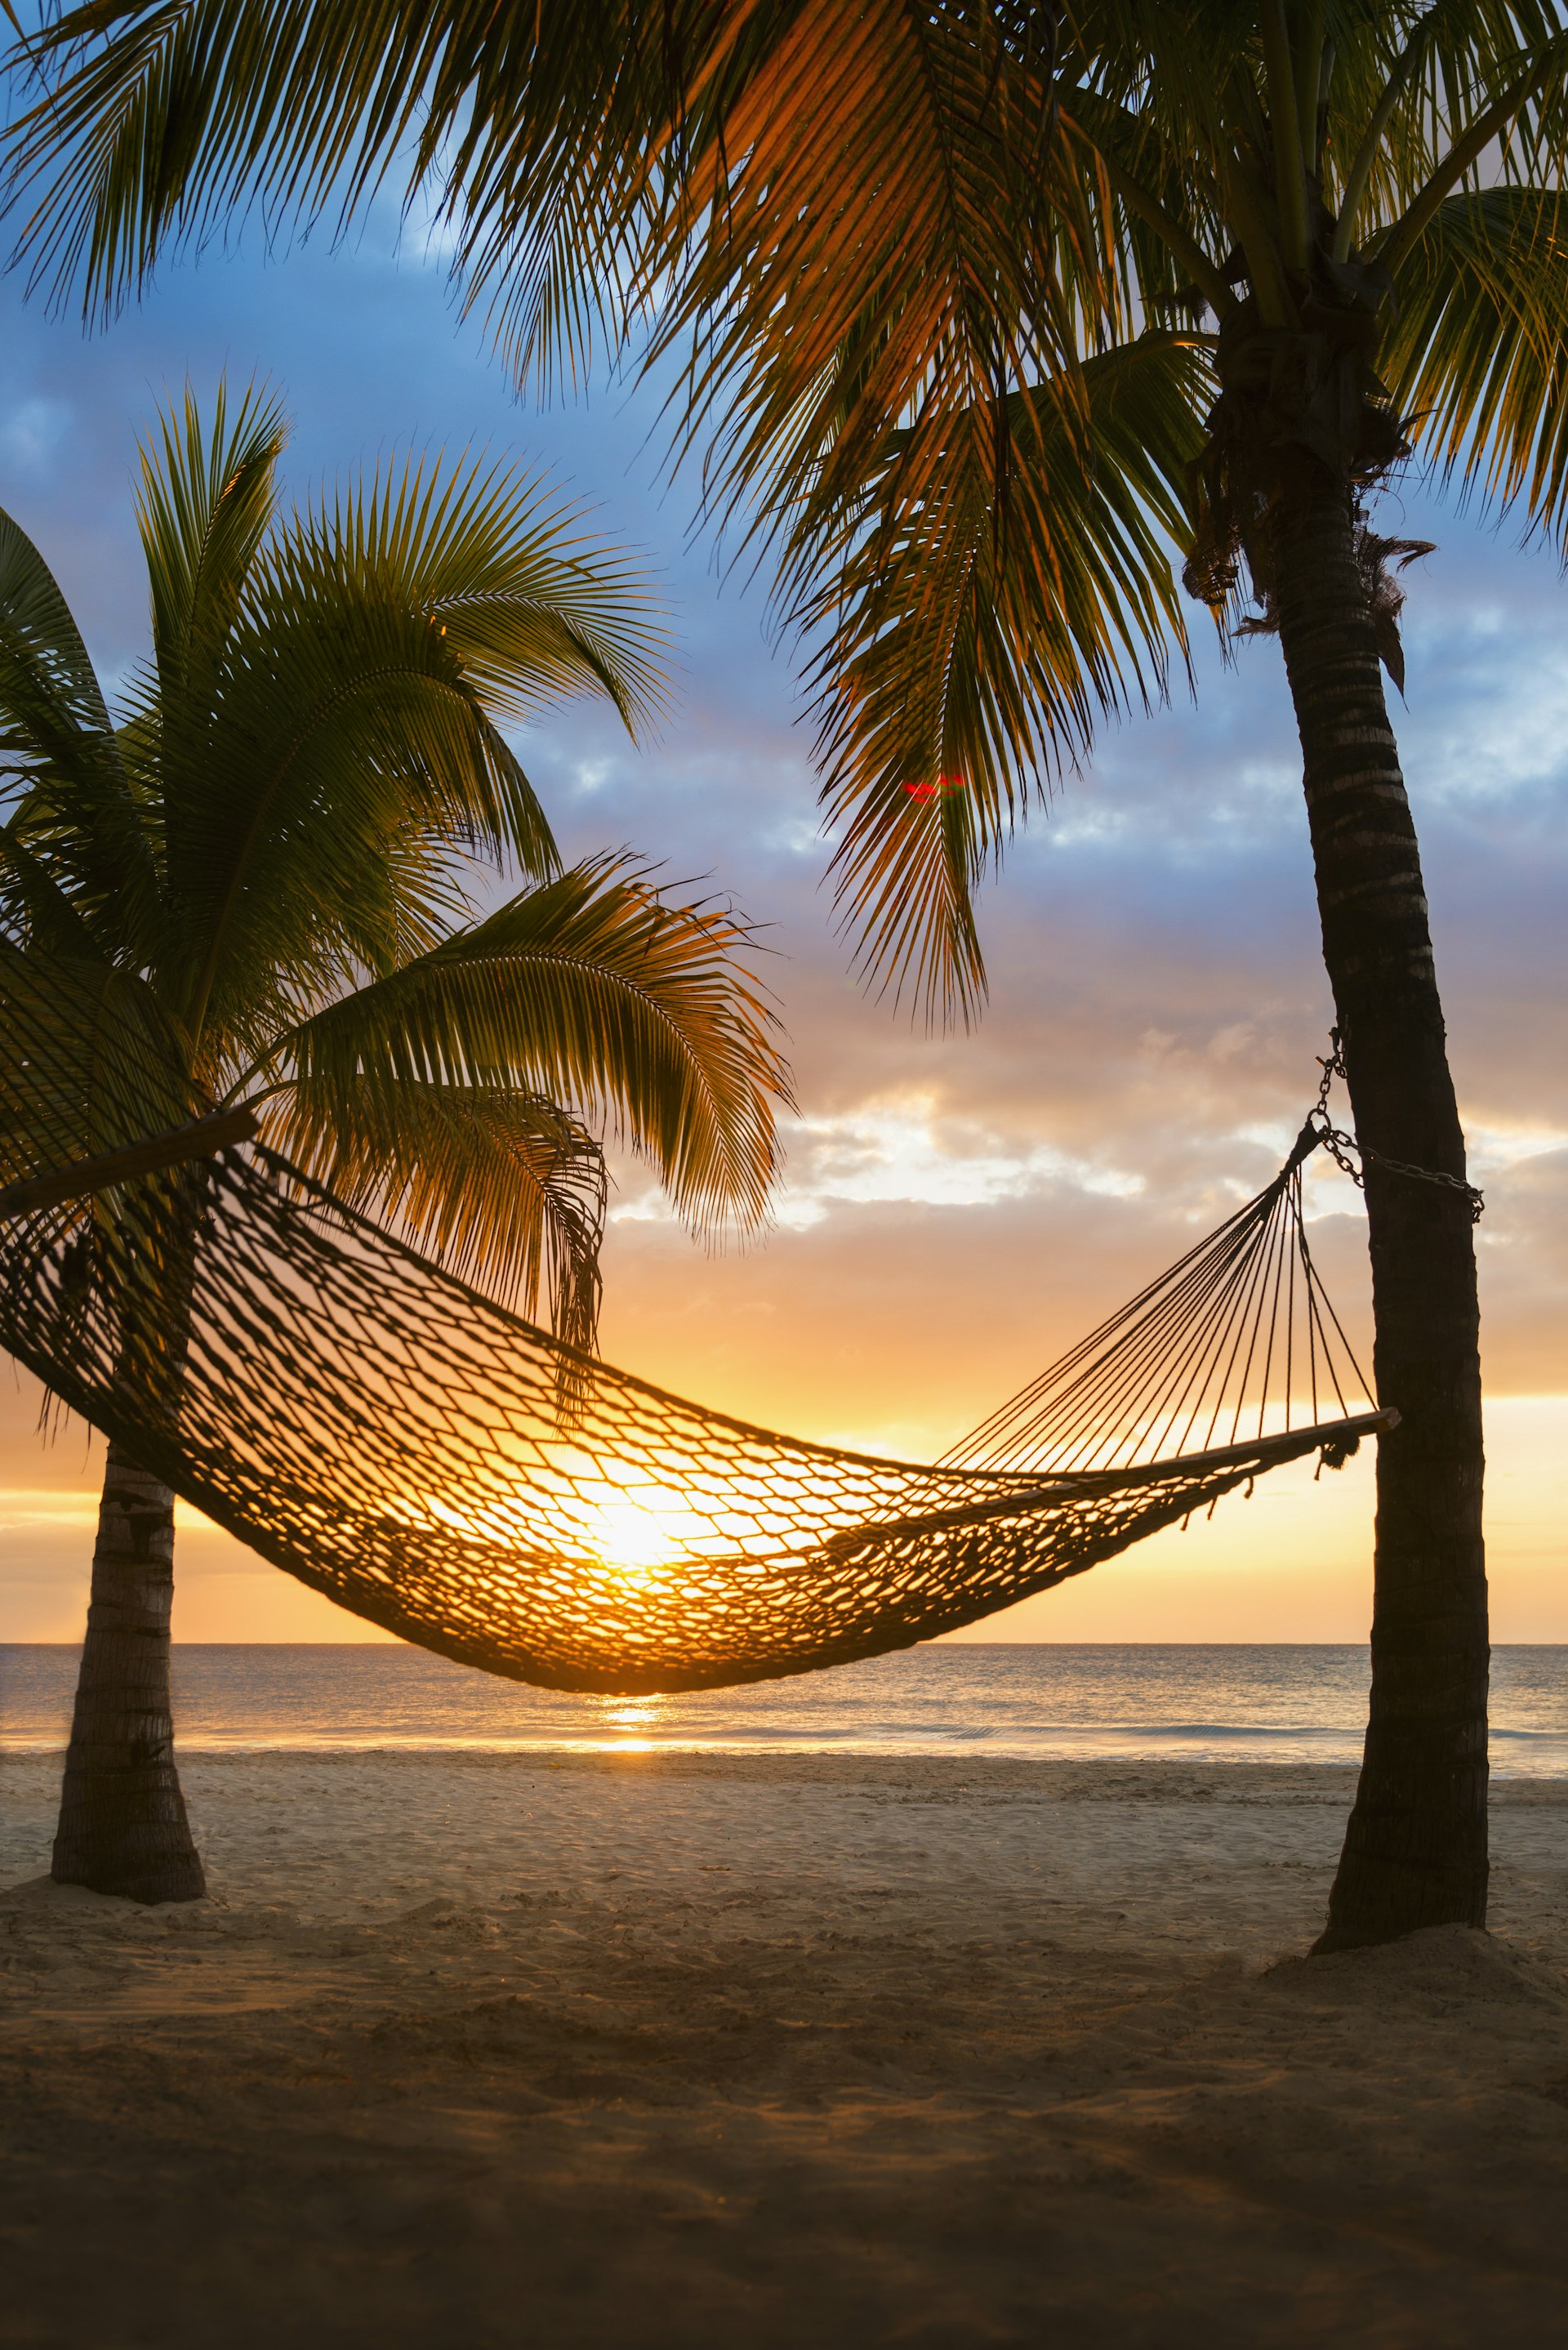 Hammock tied between palm trees on the beach during sunset